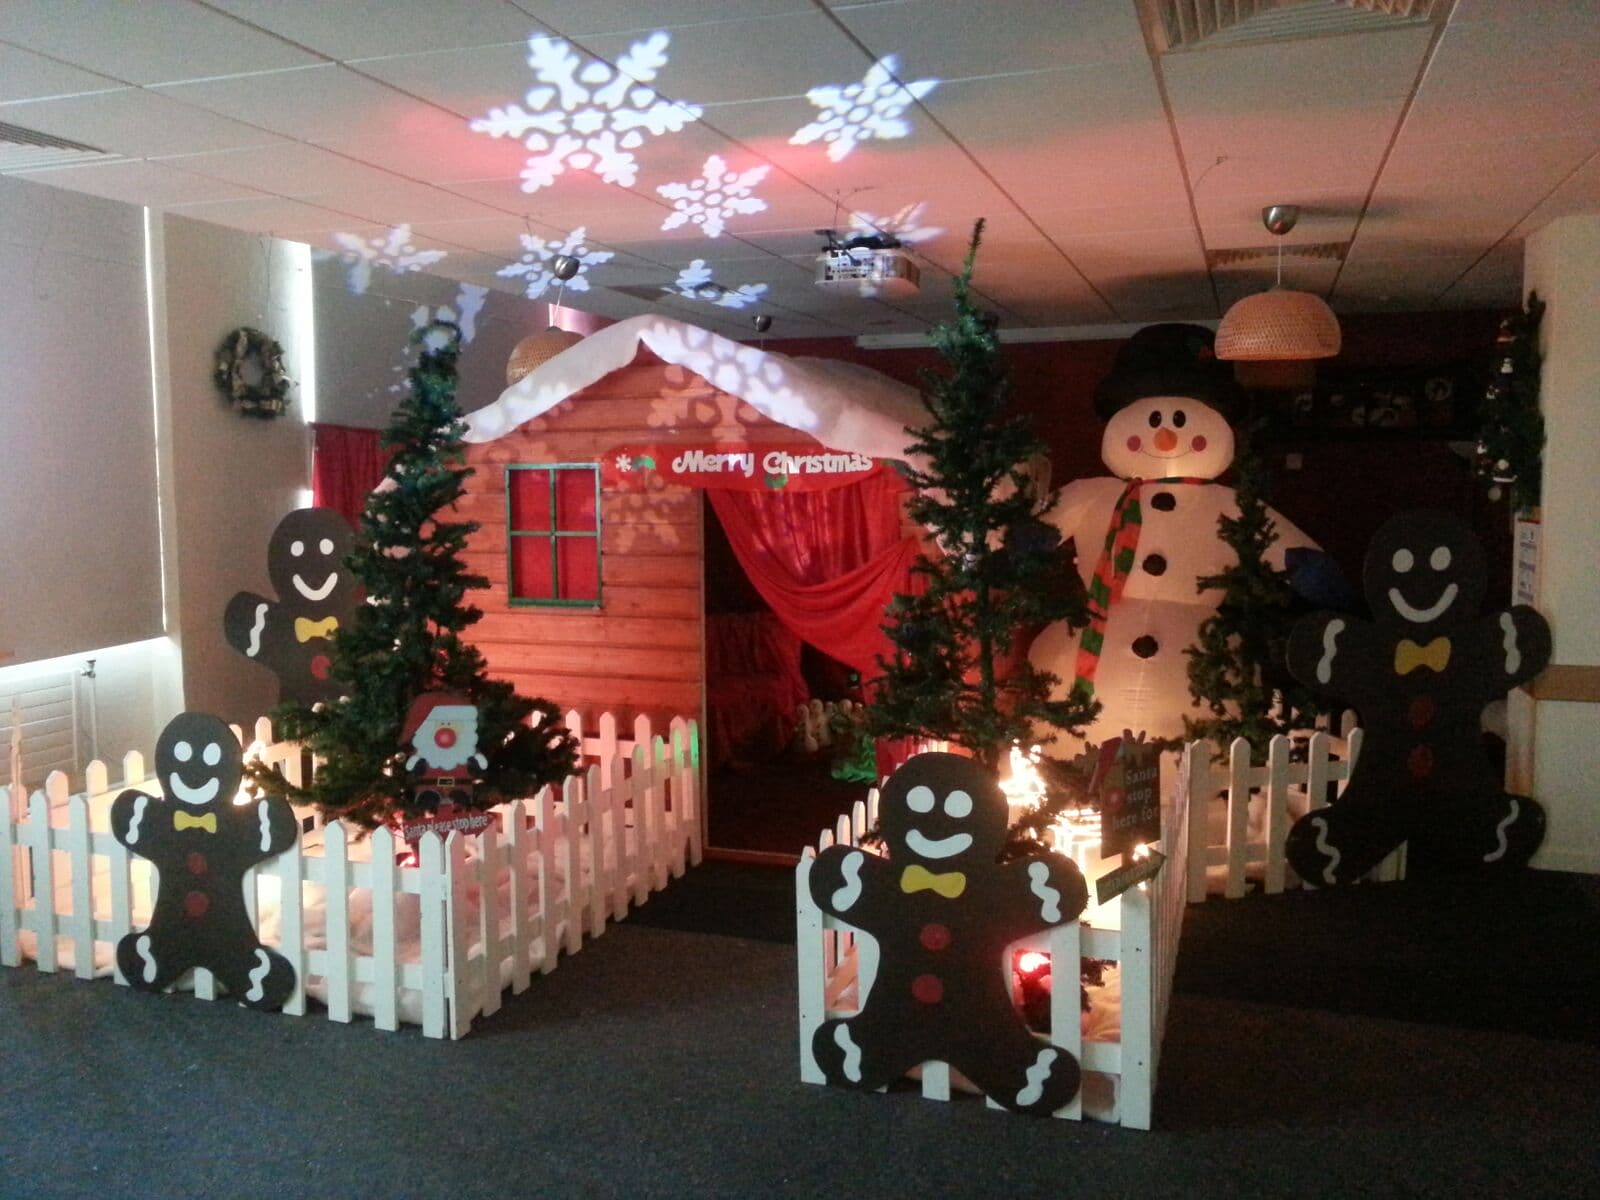 an office has been transformed into a magical winter wonderland with a Santa's grotto, inflatable snowman, and other Christmas decorations for a Kid's Christmas party in Dublin